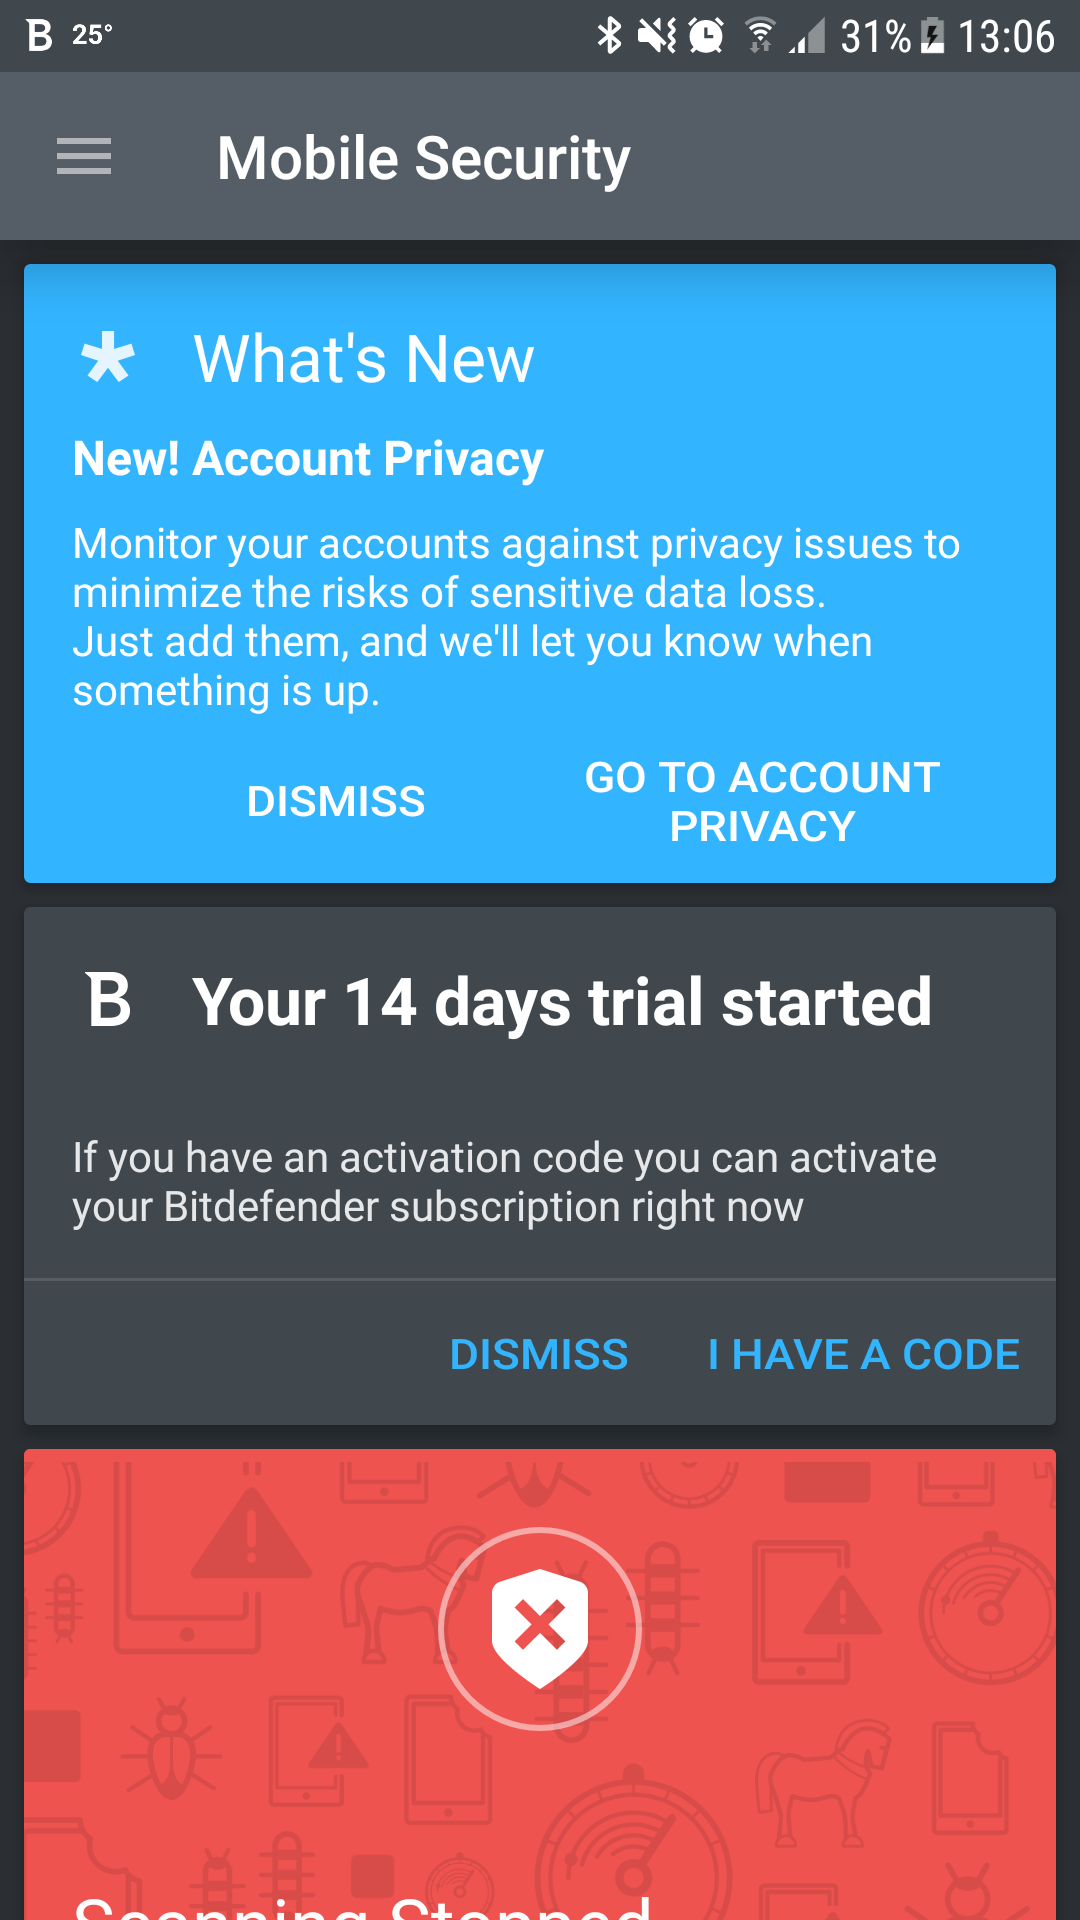 Bitdefender Mobile Security for Android Key (1 Year / 1 Device) 12.42 USD